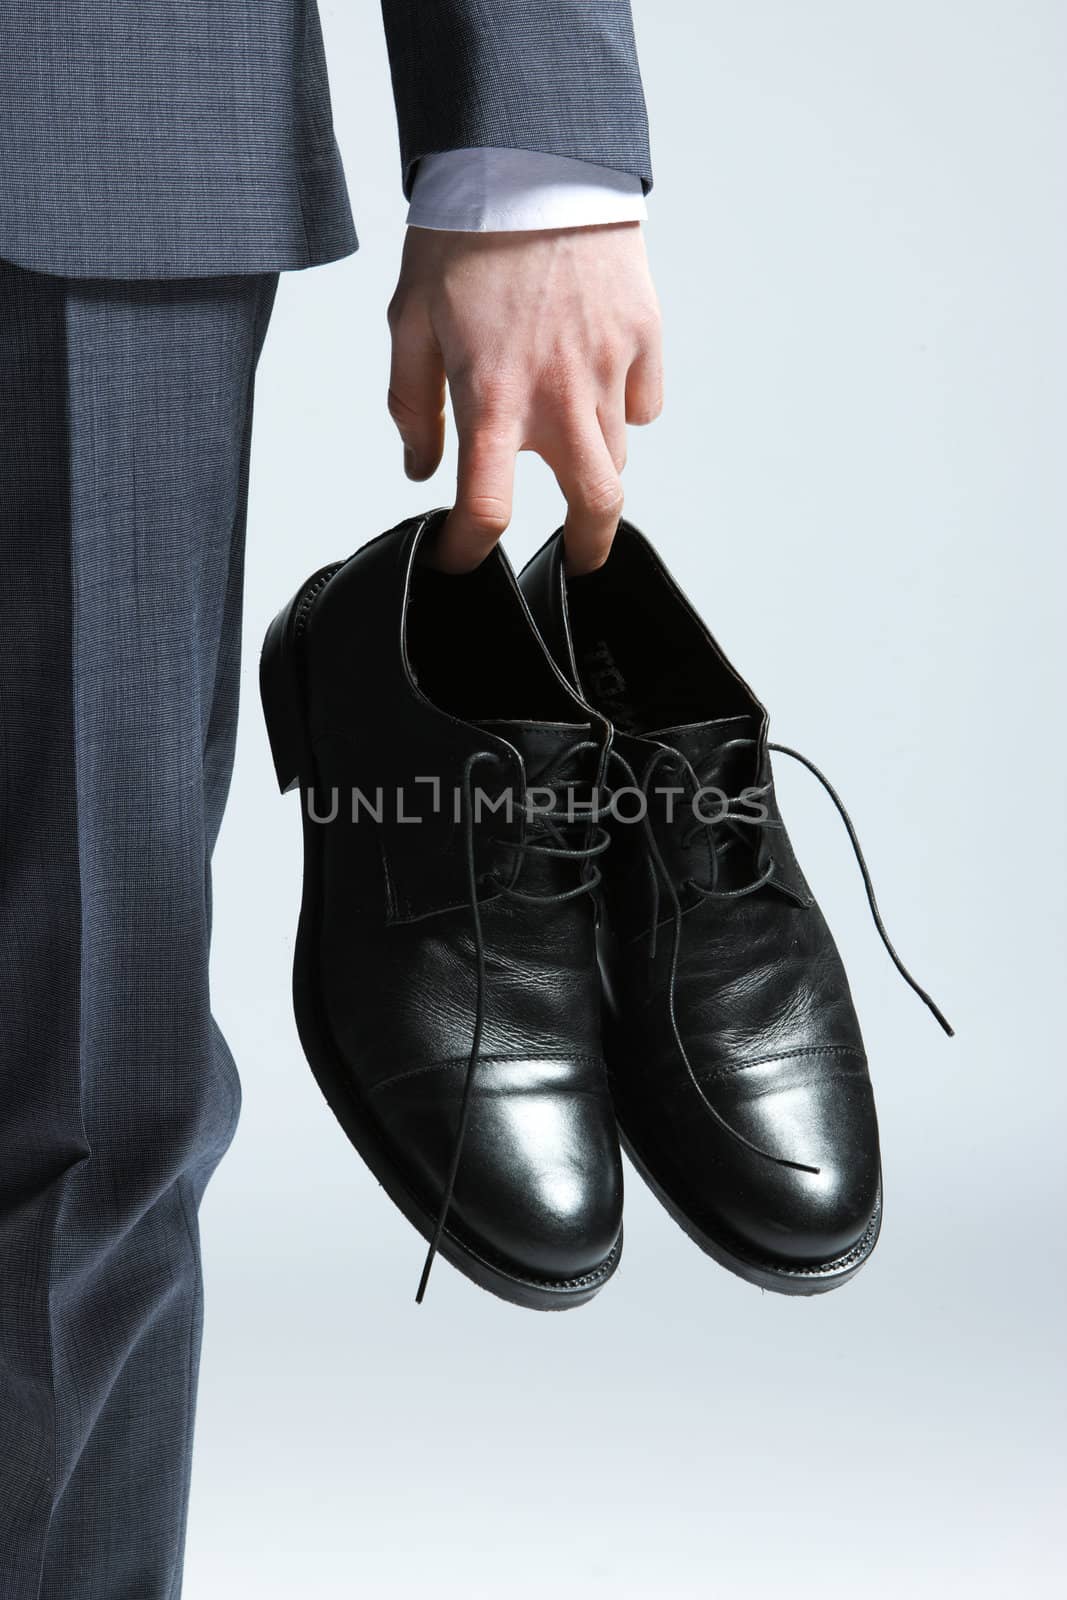 businessman holding the shoes in hand, close up